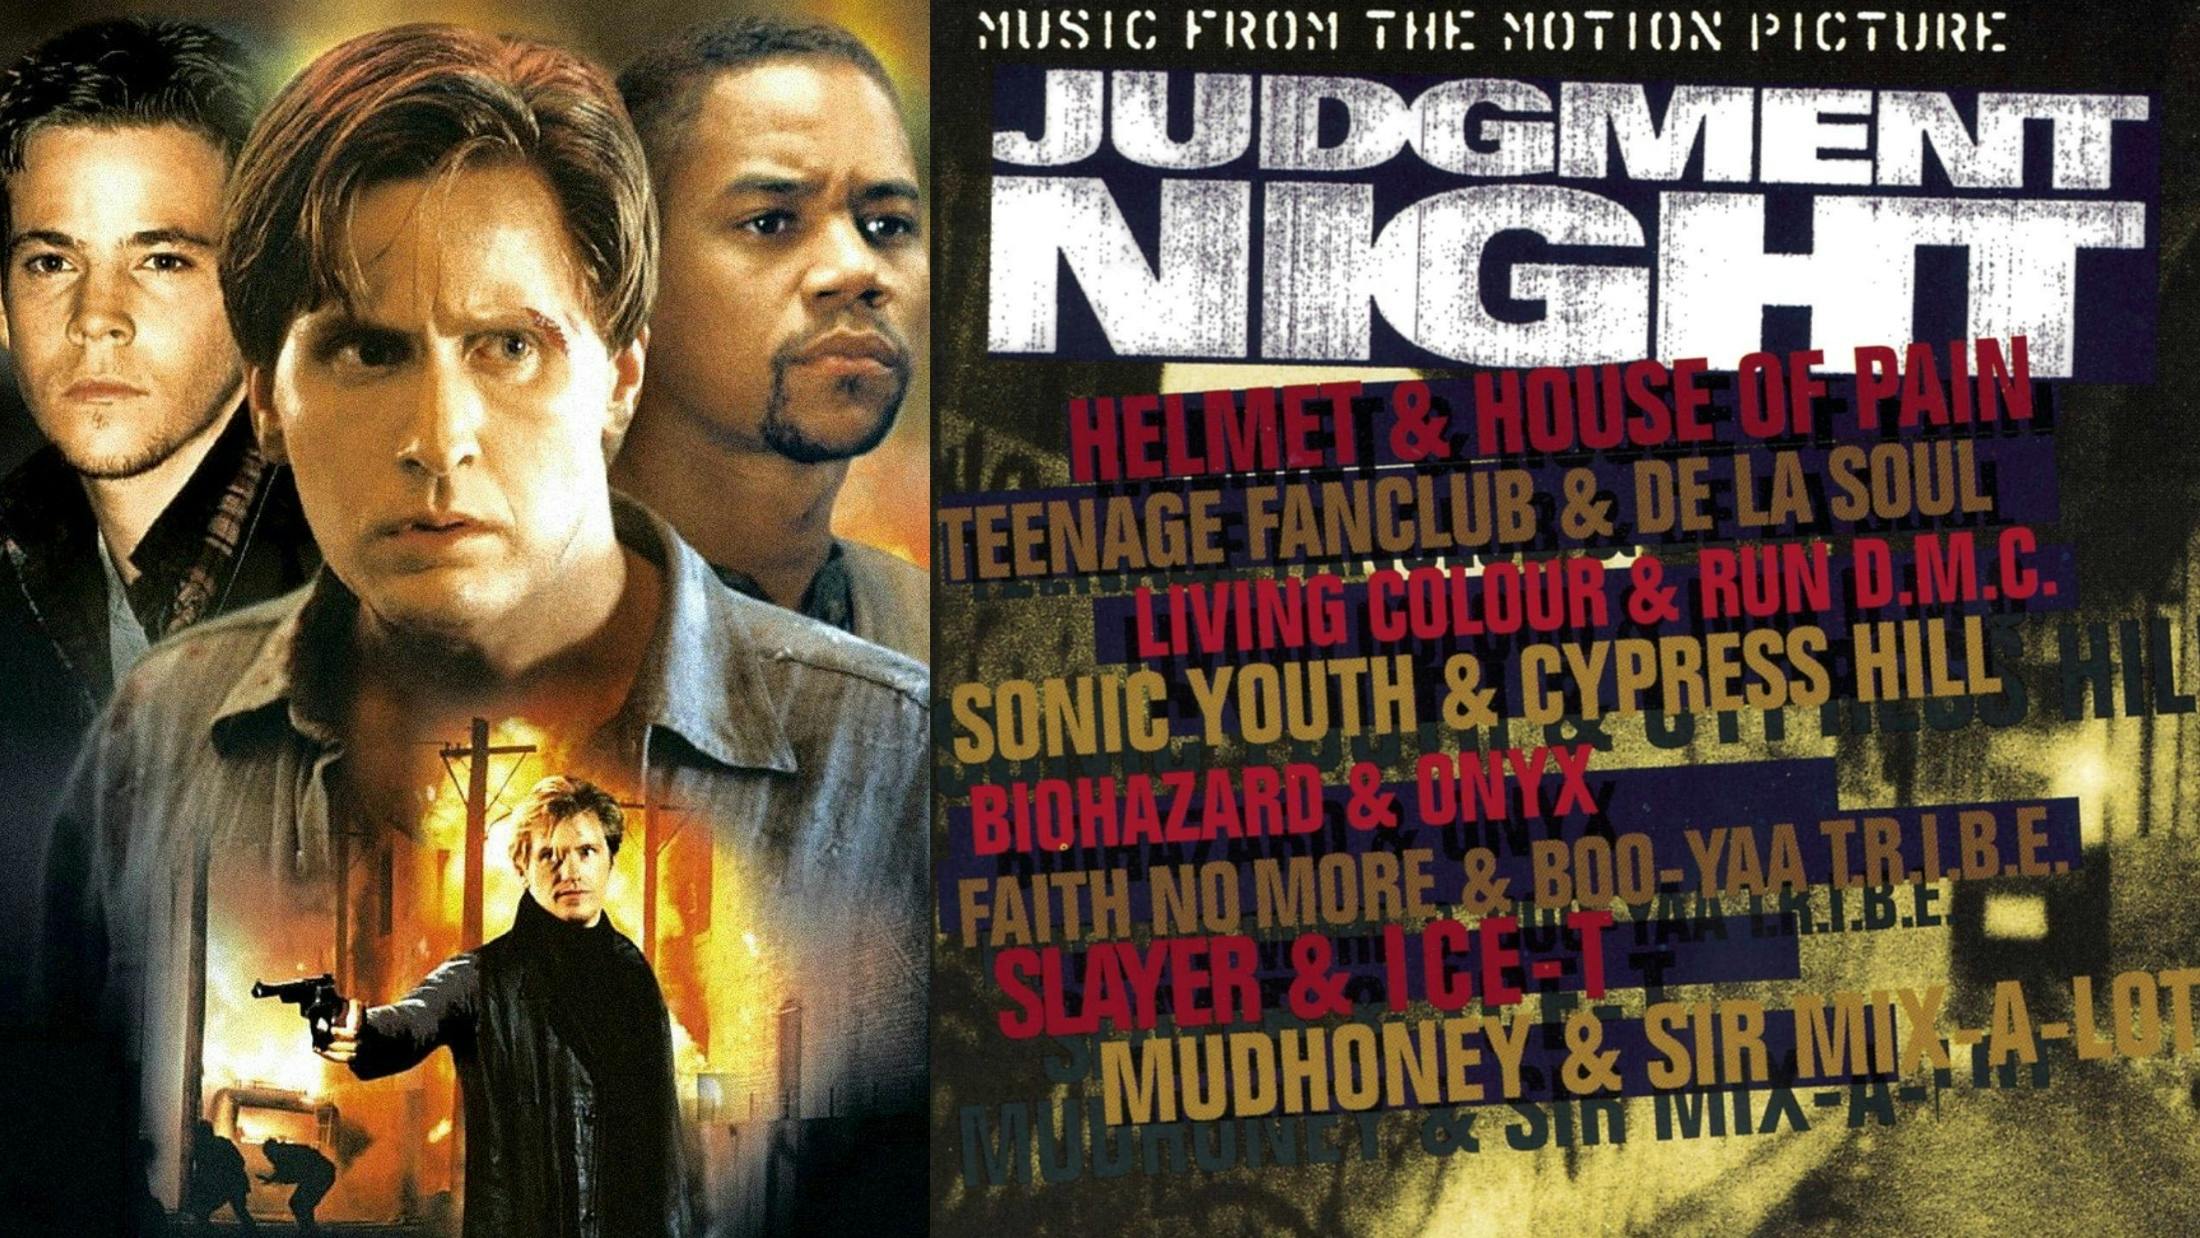 A love letter to the Judgment Night album